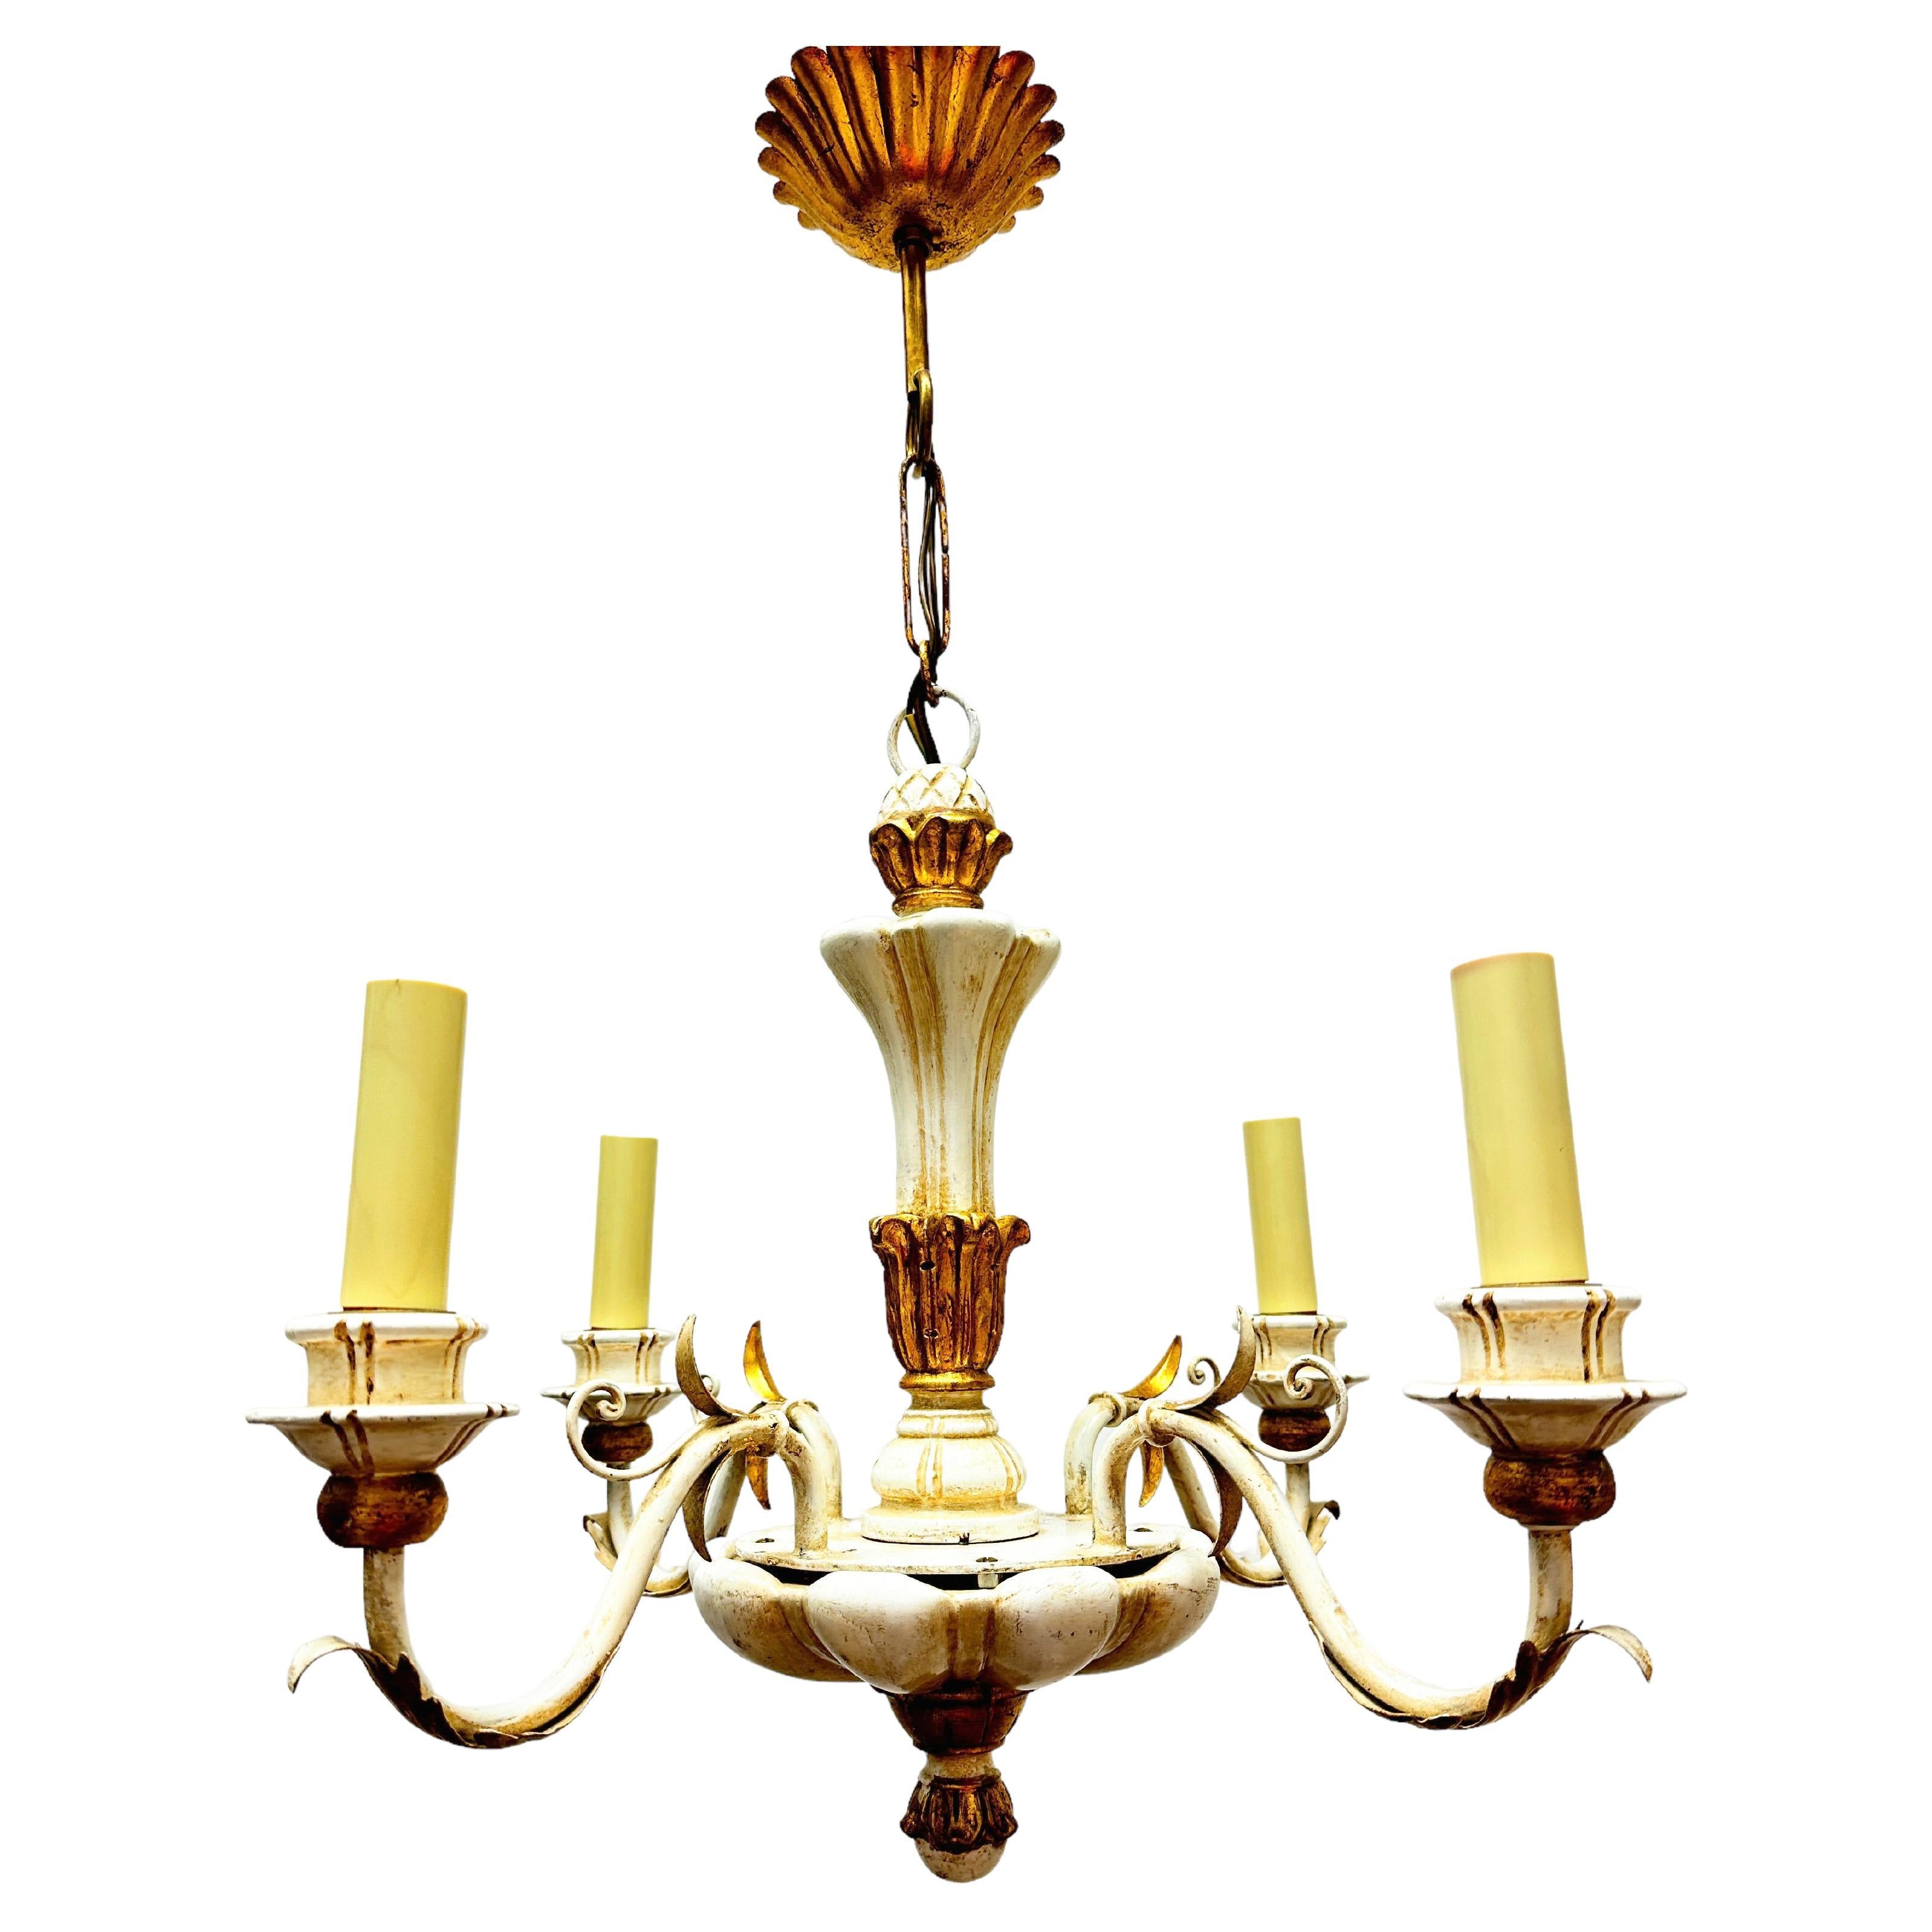 Four Light Chippy White & Giltwood Hollywood Regency Chandelier Tole, Austria